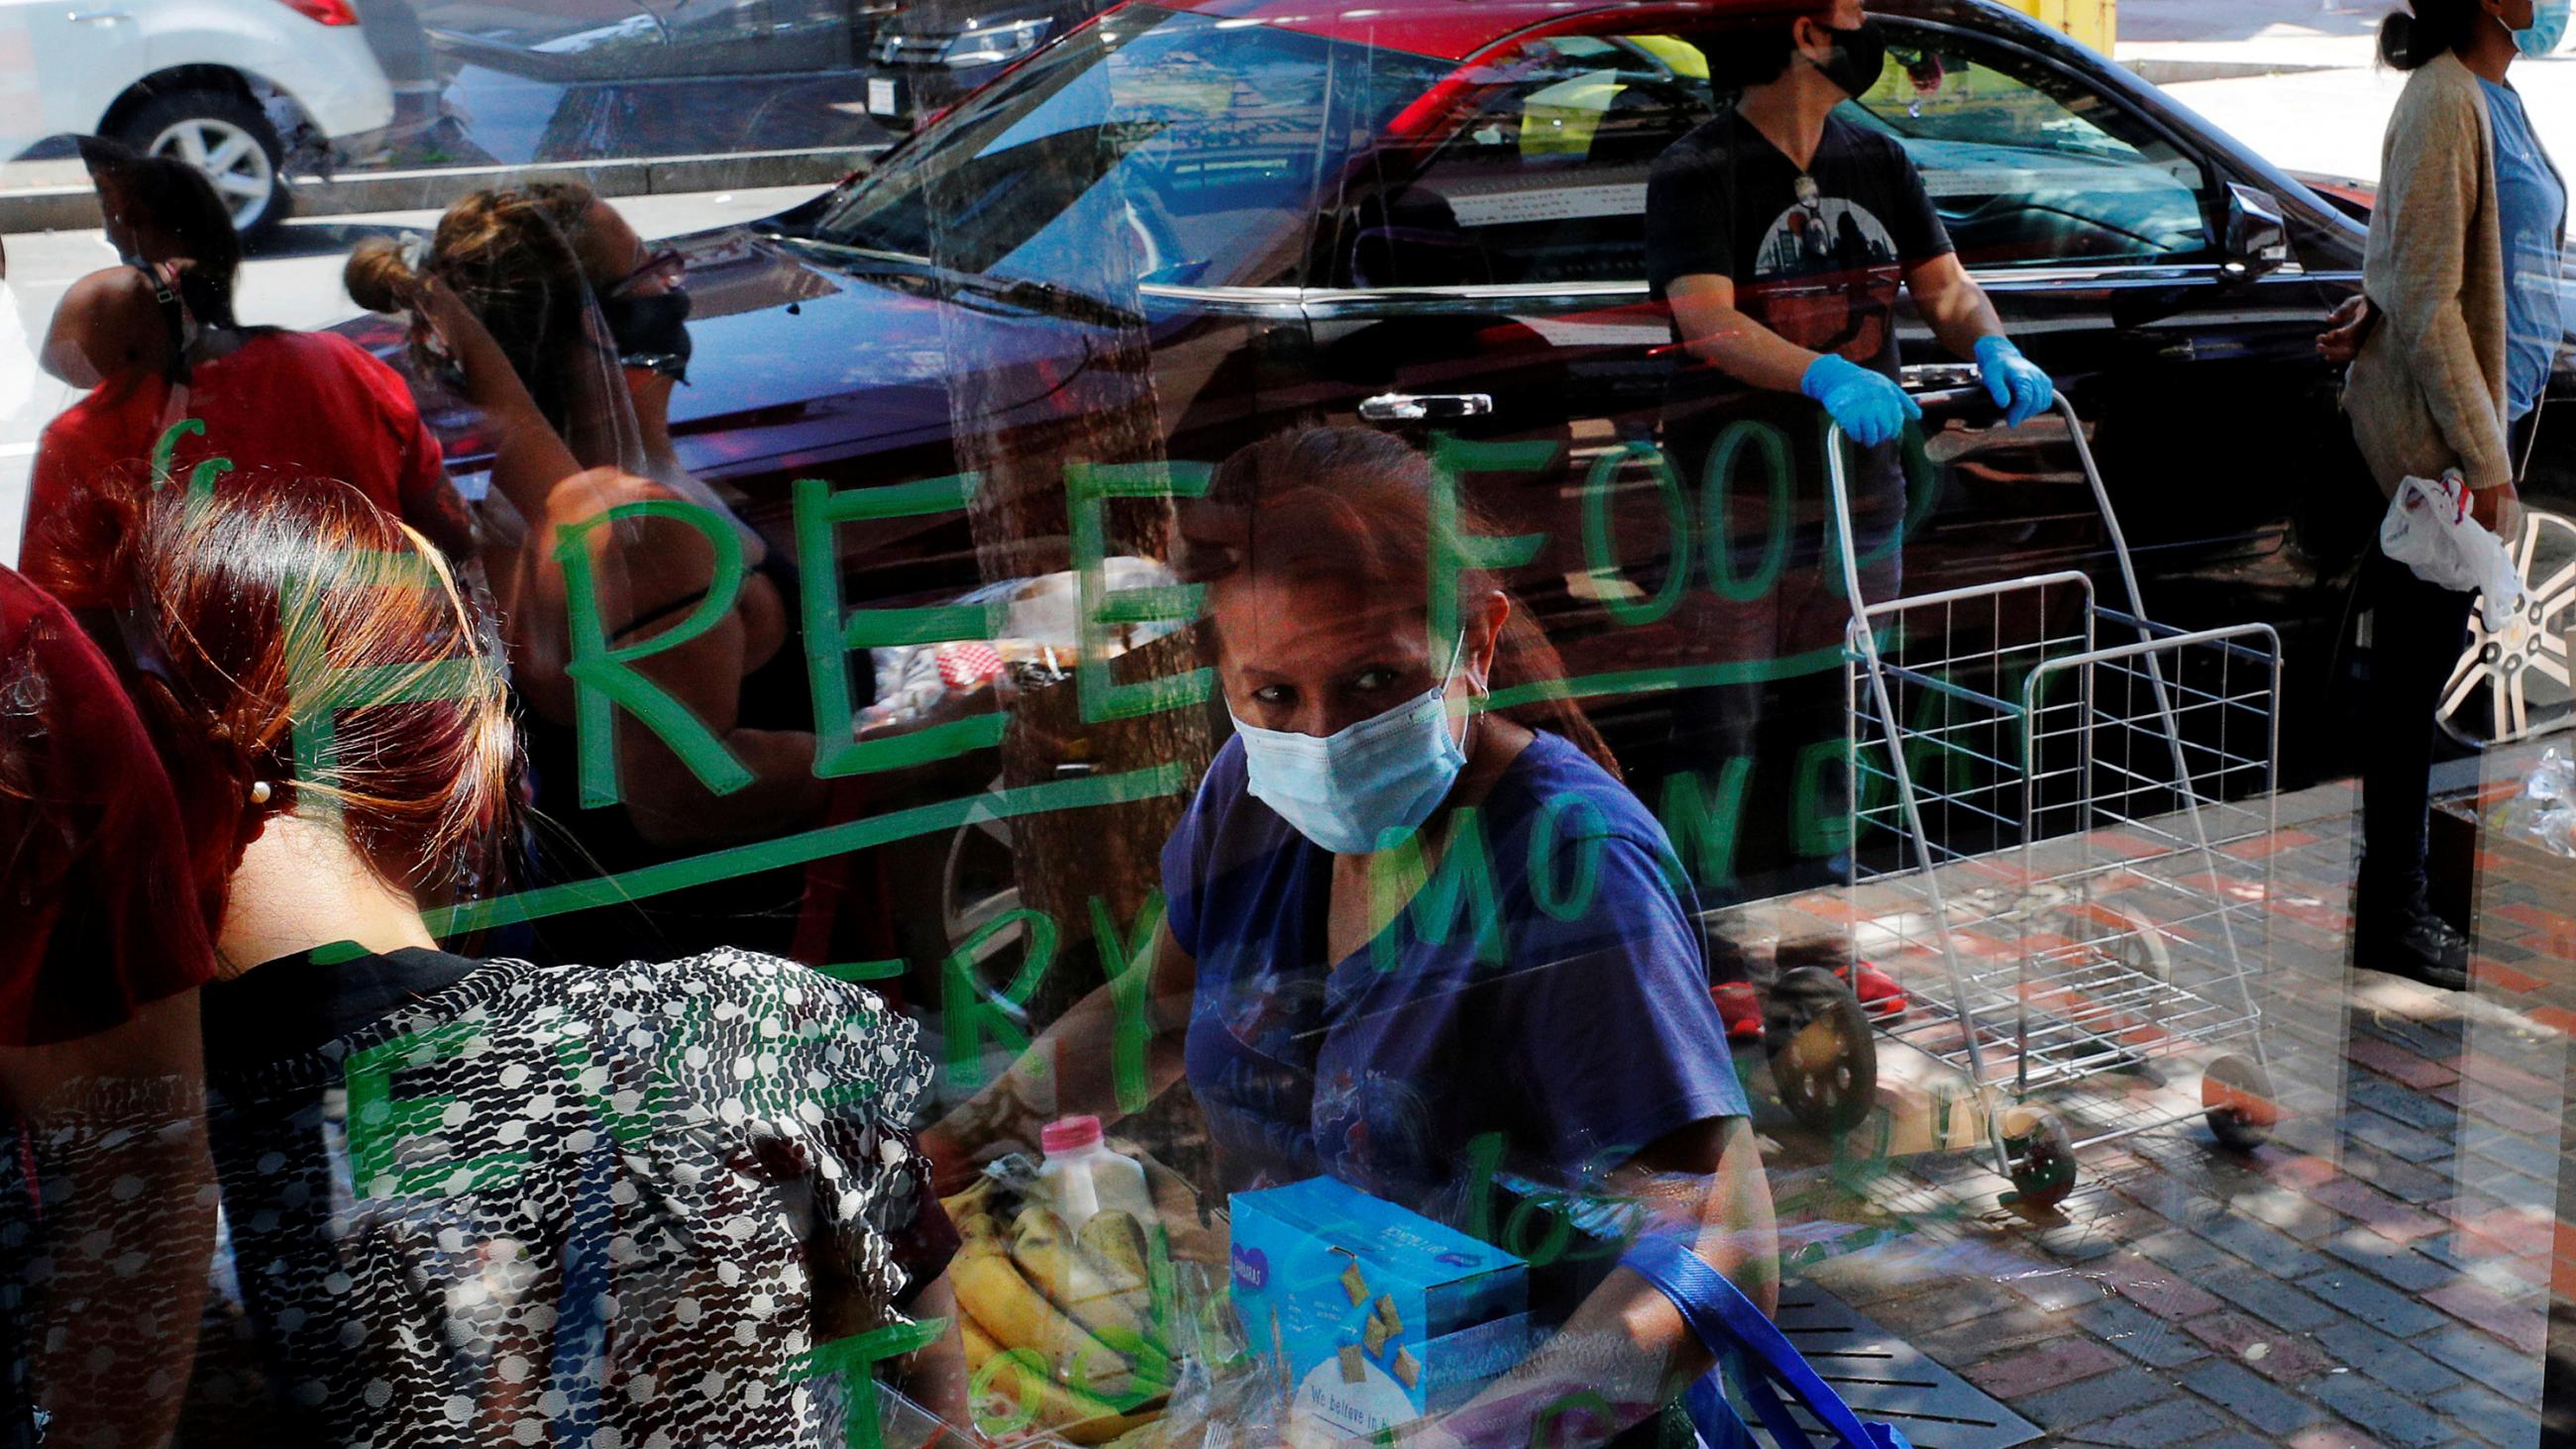 The photo shows people waiting in line while others leave with armloads of food from the other side of a plate glass storefront on which is scrawled in hand-written green letters "Free Food Every Monday." 